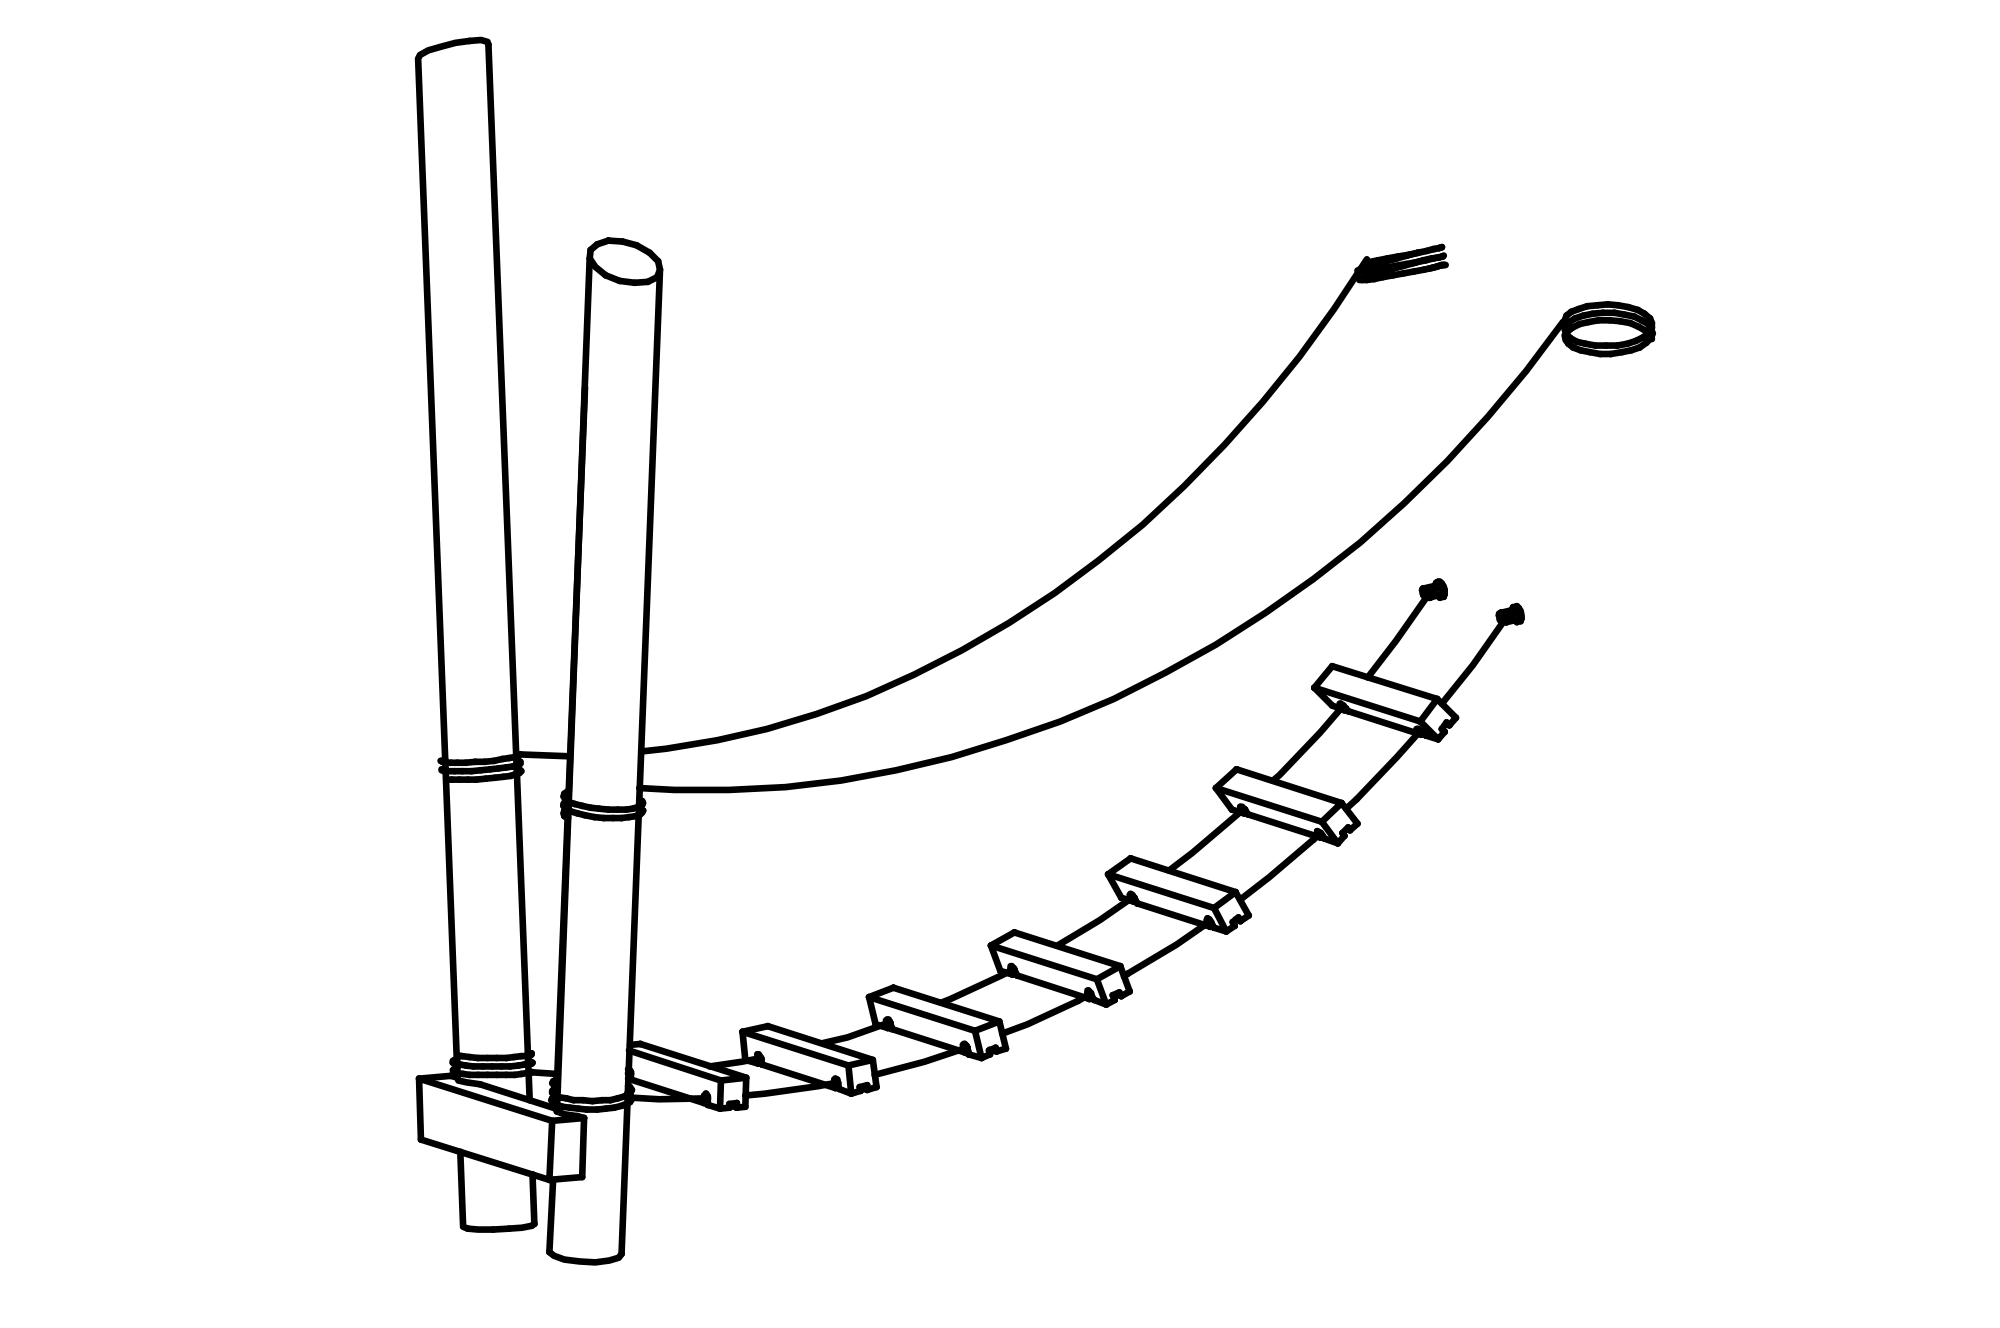 End Frame with rope ascent and walkaway